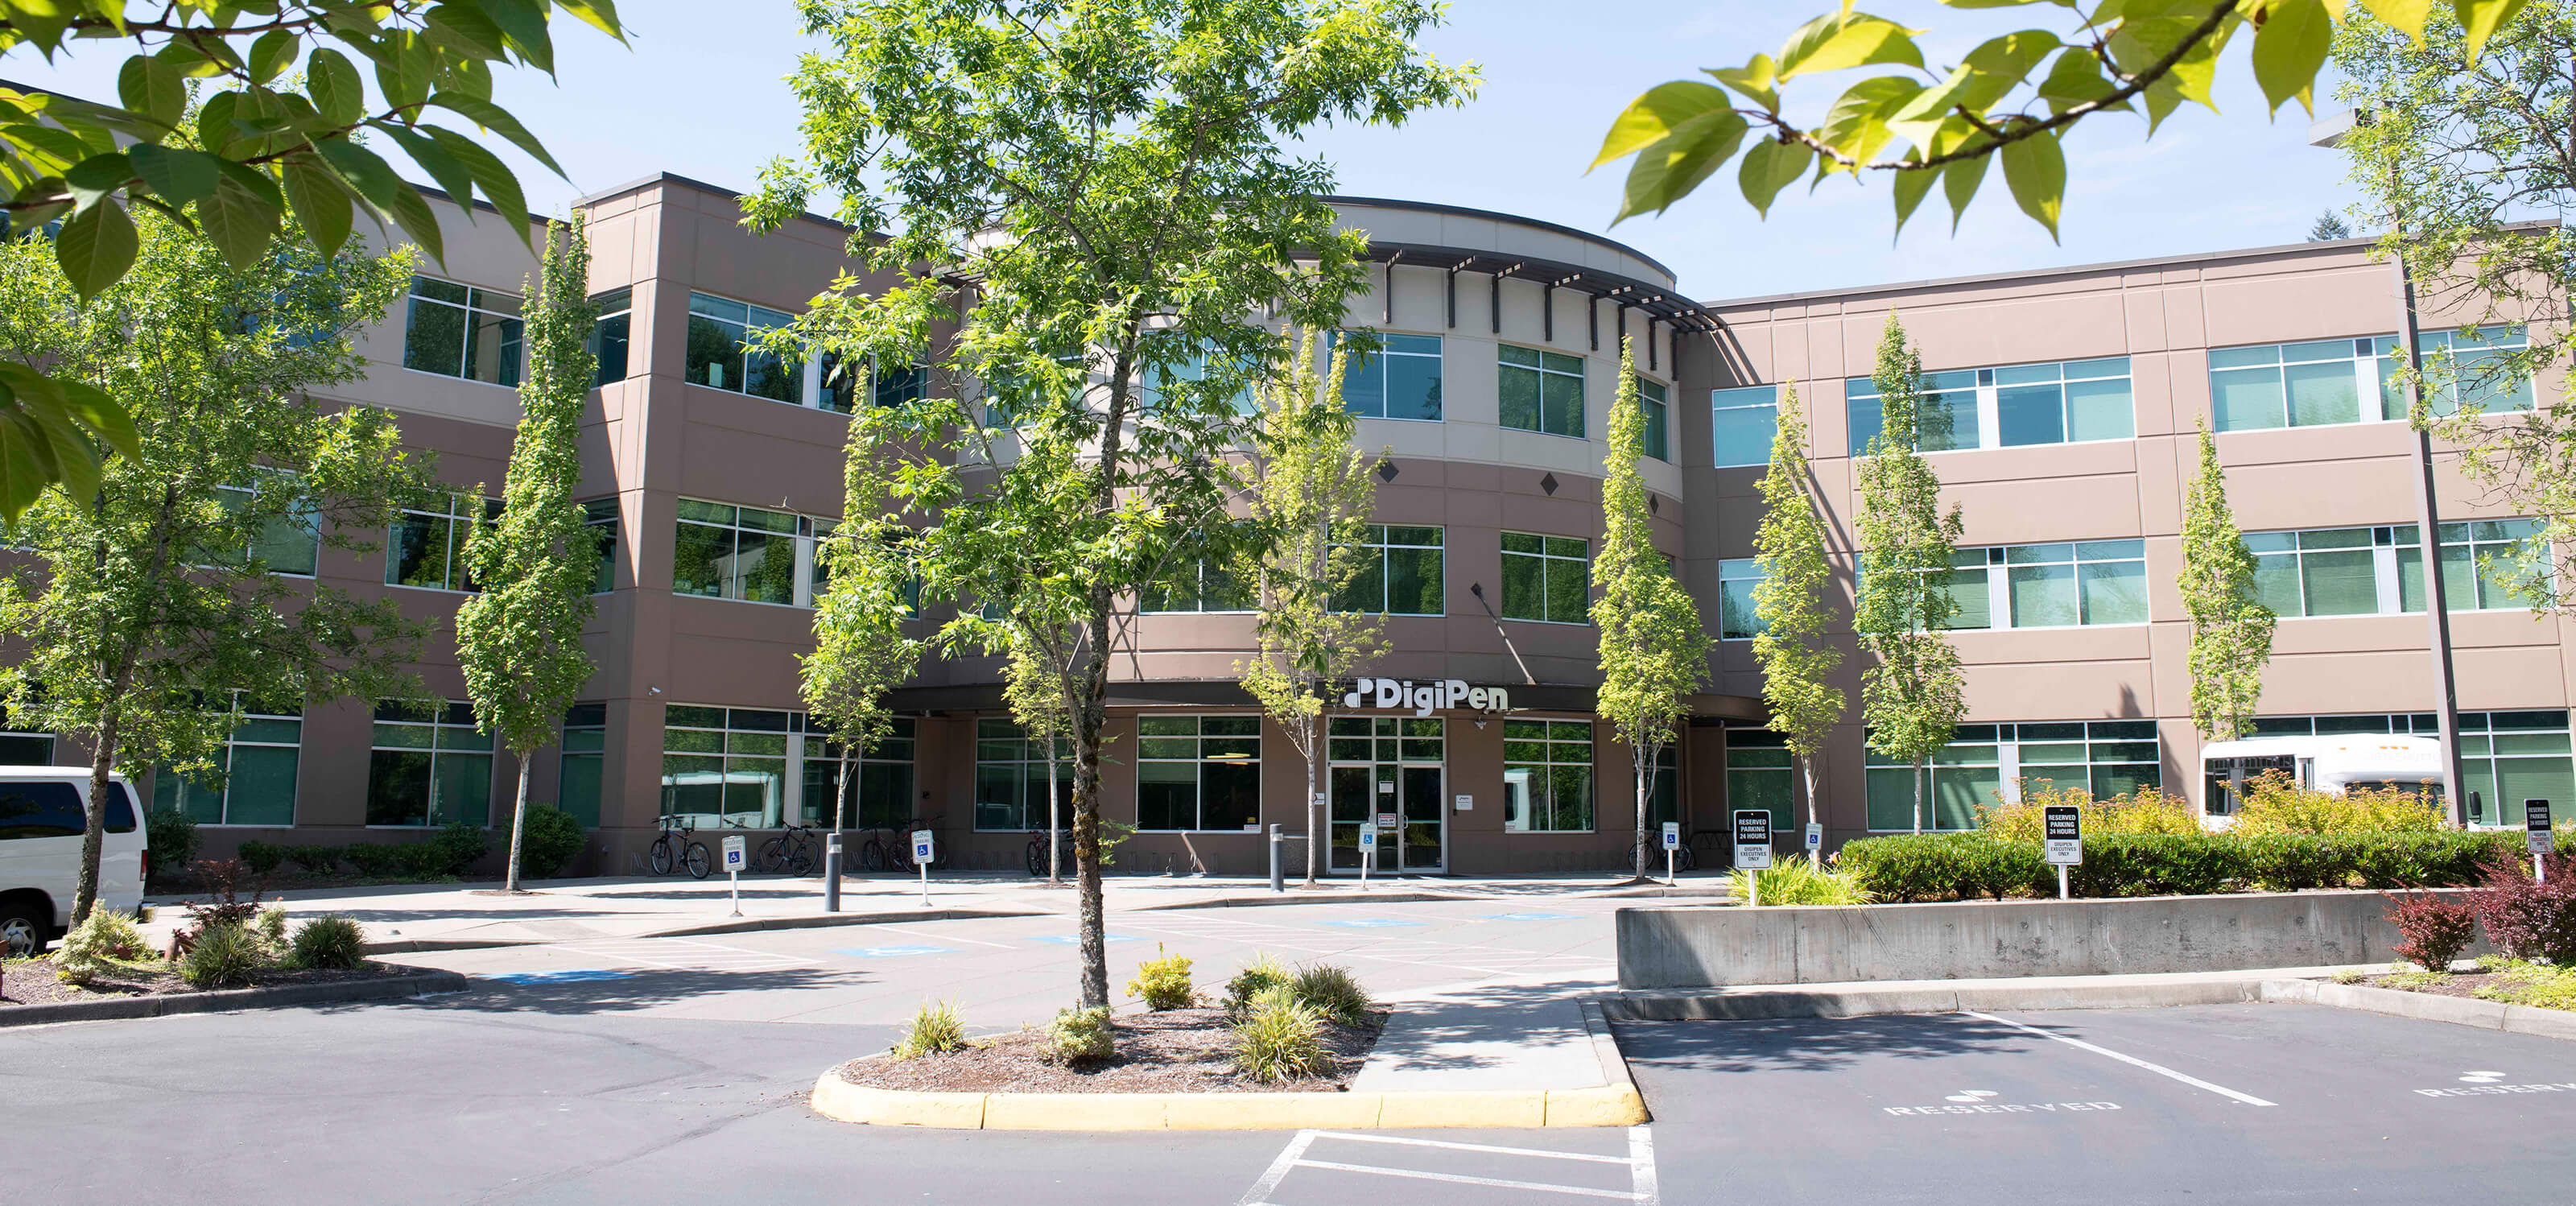 The front entrance of DigiPen's Redmond, WA campus